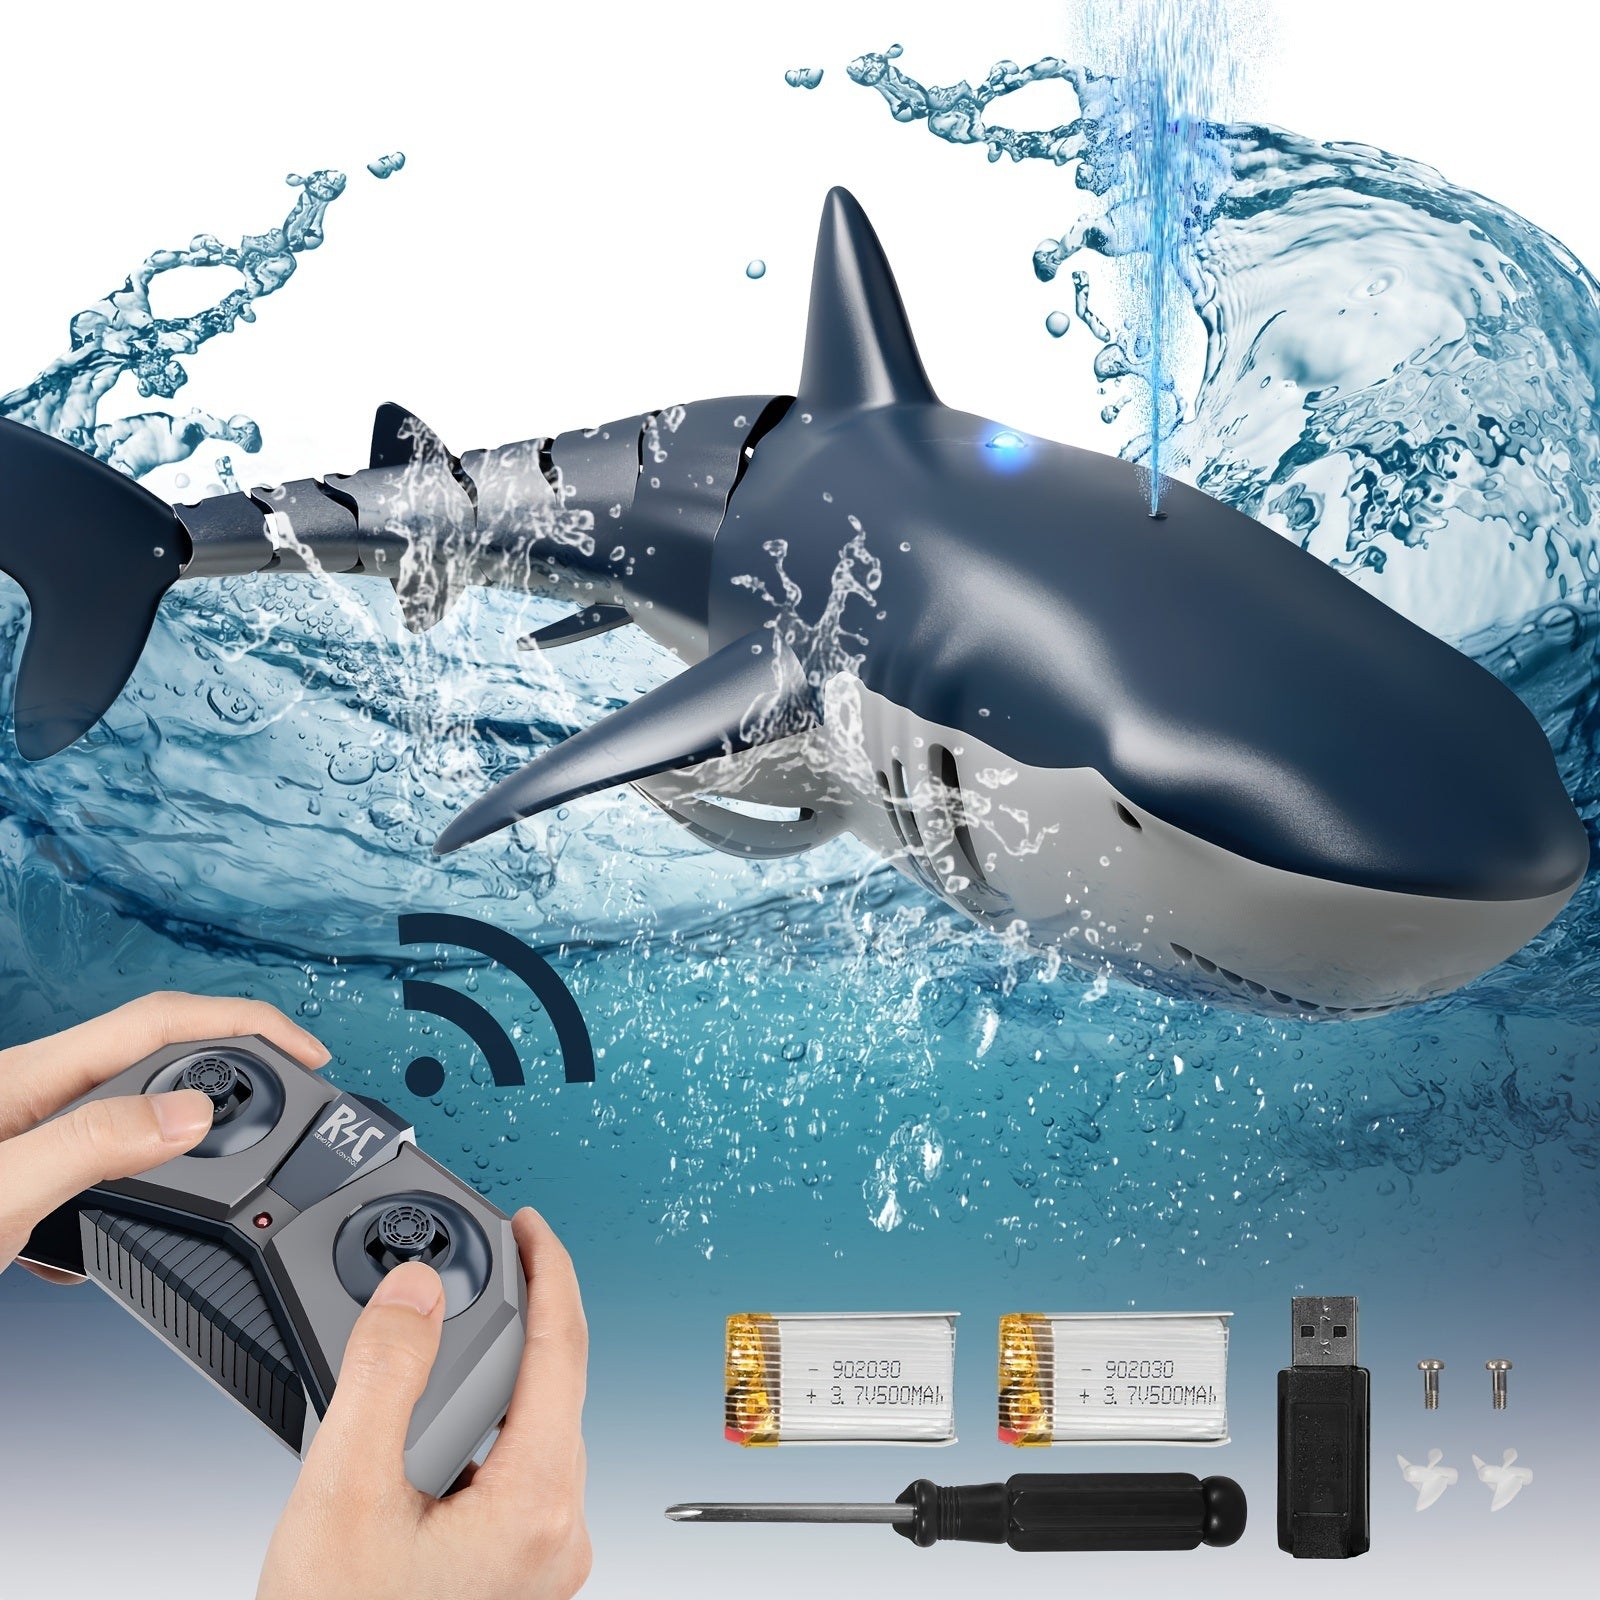 Remote Control Shark 1:18 High Simulation Scale Fish With Light & Spray Water For Lake Bathroom Pool Toys For Kids Ages 4 5 7 8 Boys  Birthday Gift RC Boat